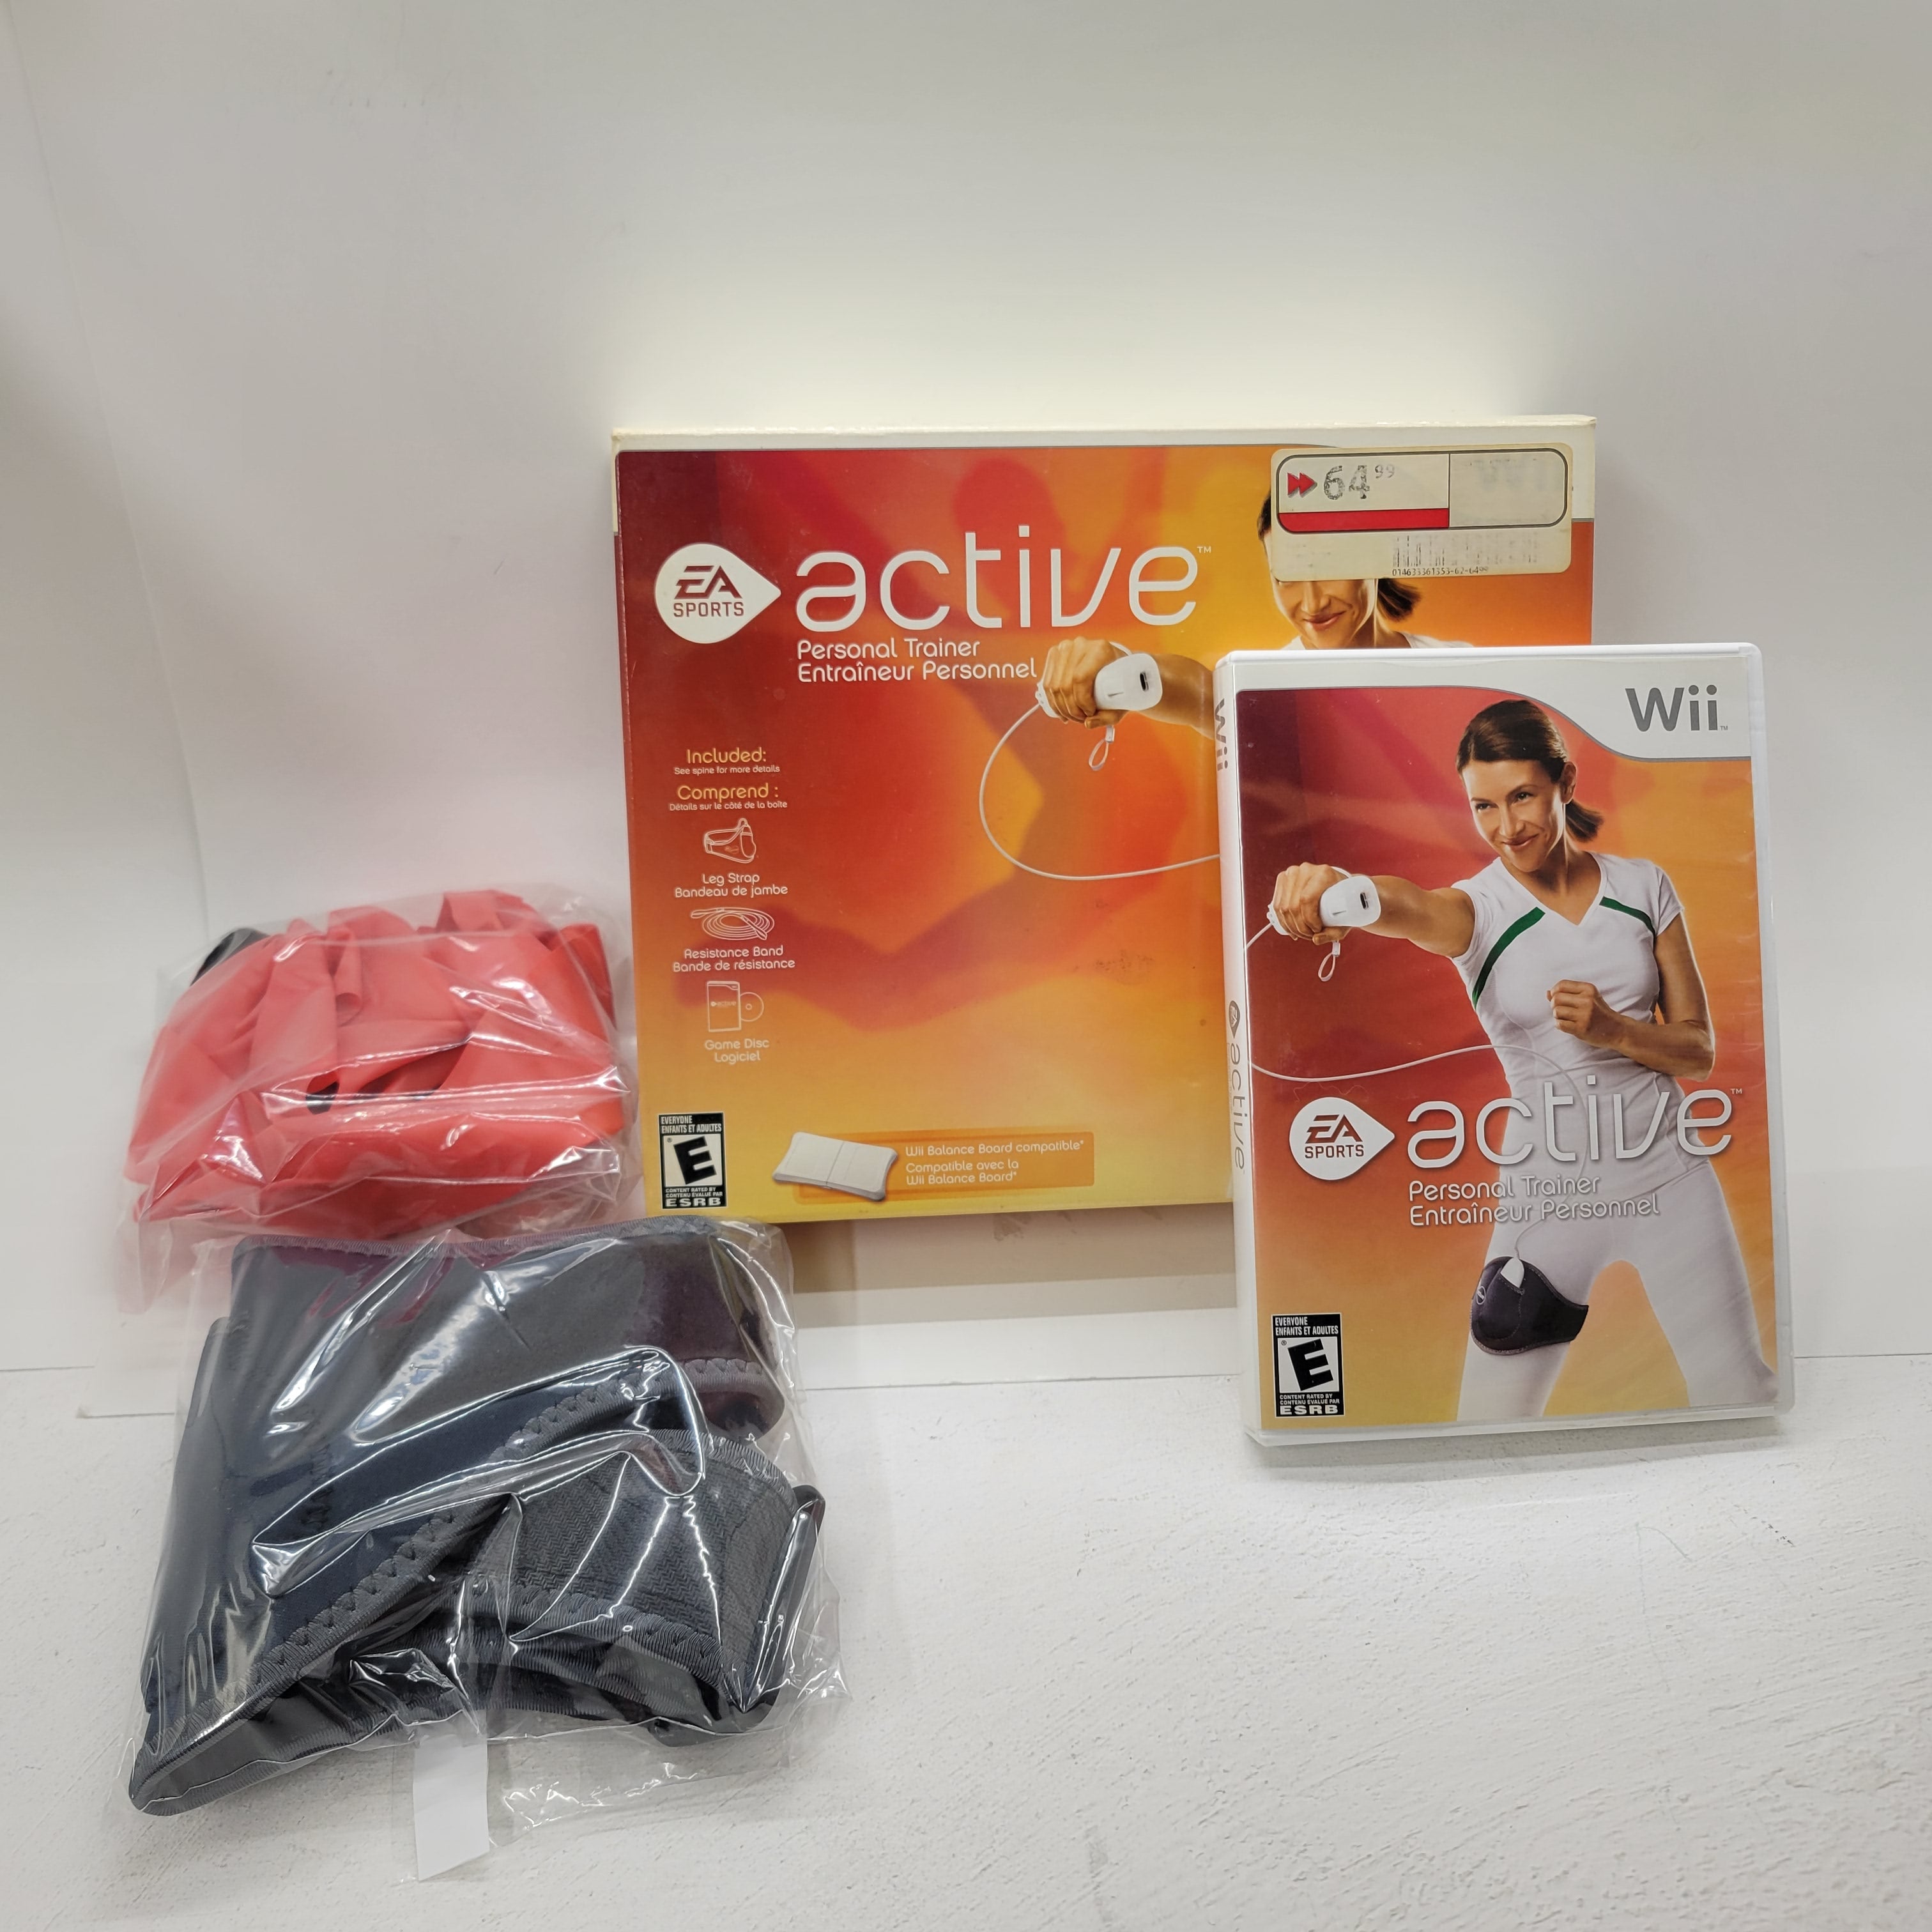 EA Sports Active (2009), Wii Game